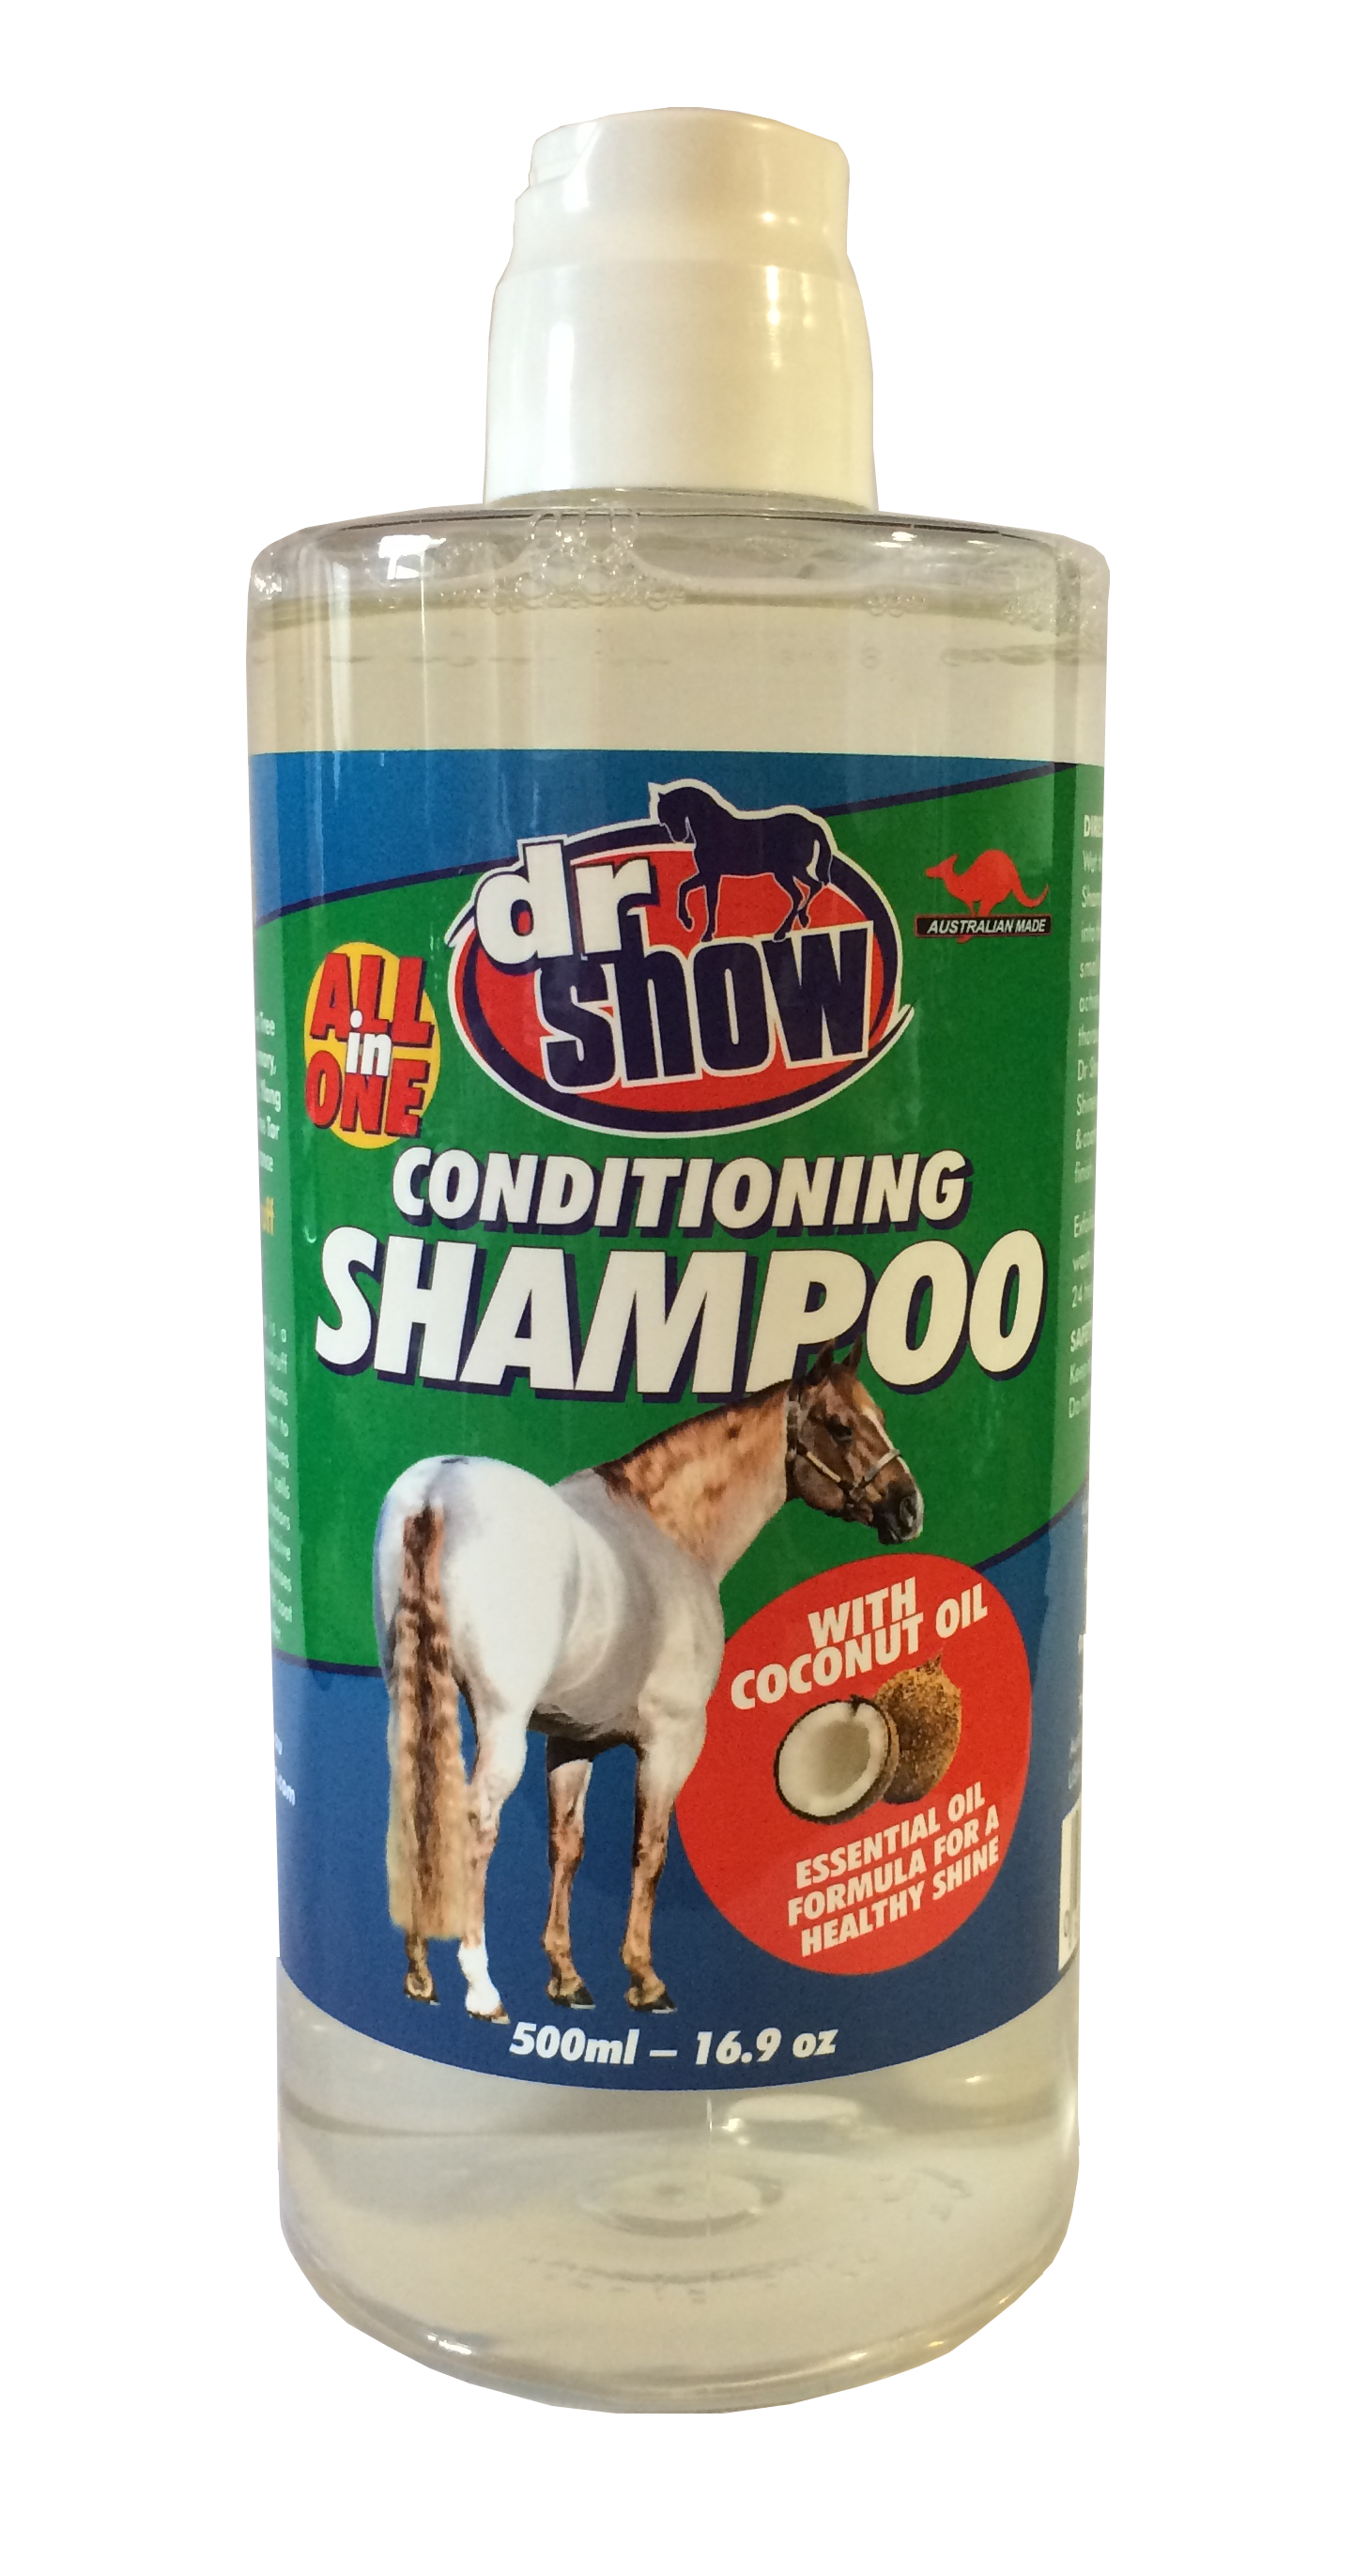 Dr Show ALL in 1 SHAMPOO has 8 Essential Oils